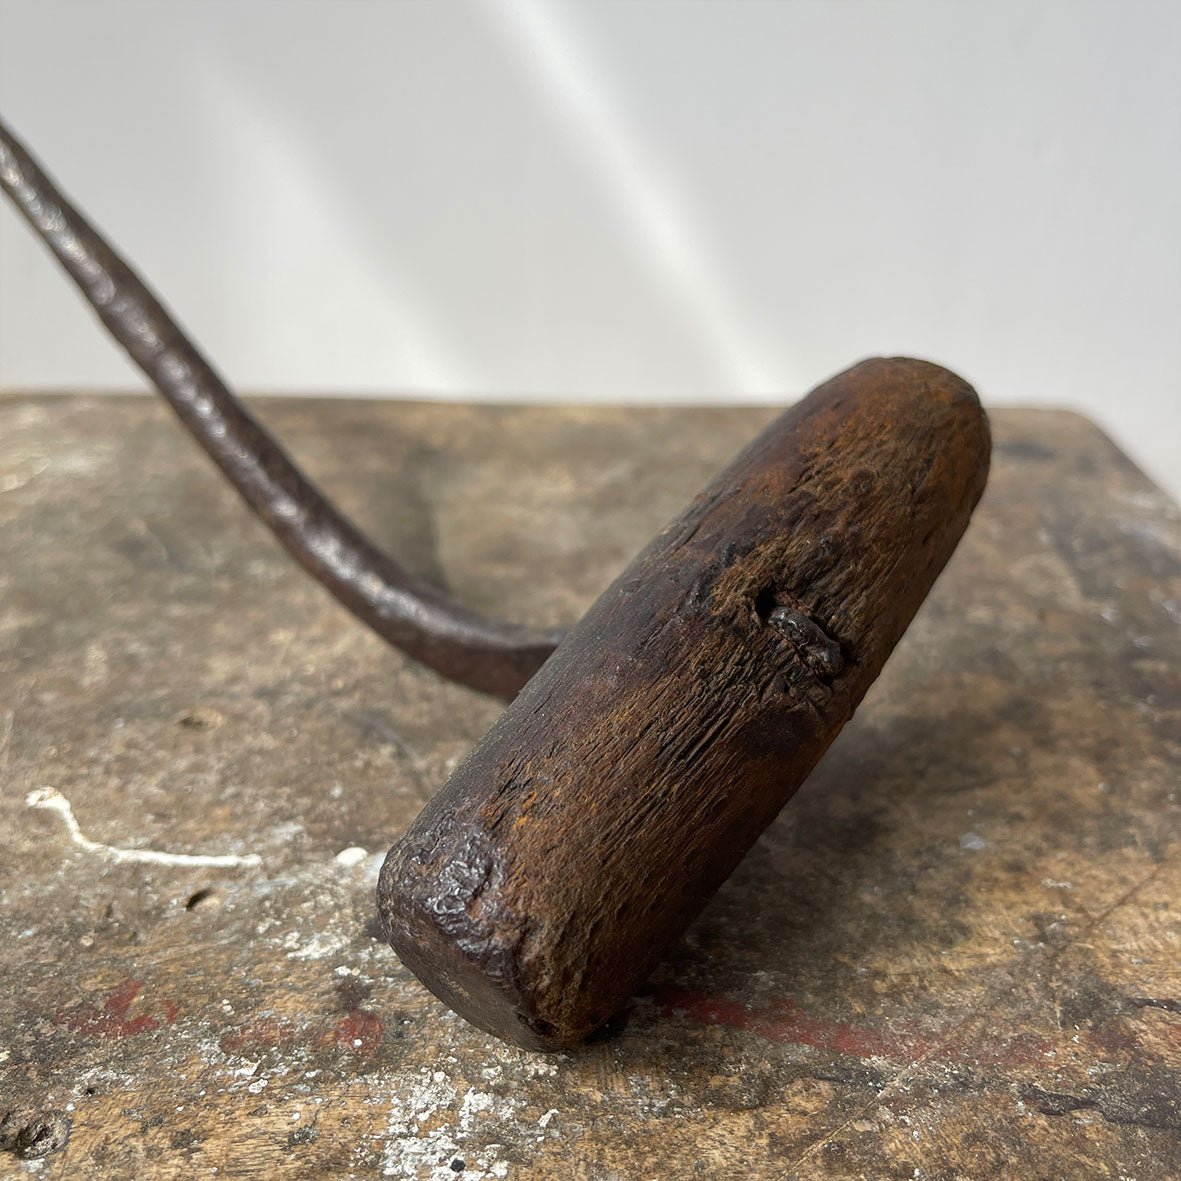 A Victorian Sack Hook with a beautifully aged handle and solid spiked hook. Very tactile in the hand. - SHOP NOW - www.intovintage.co.uk